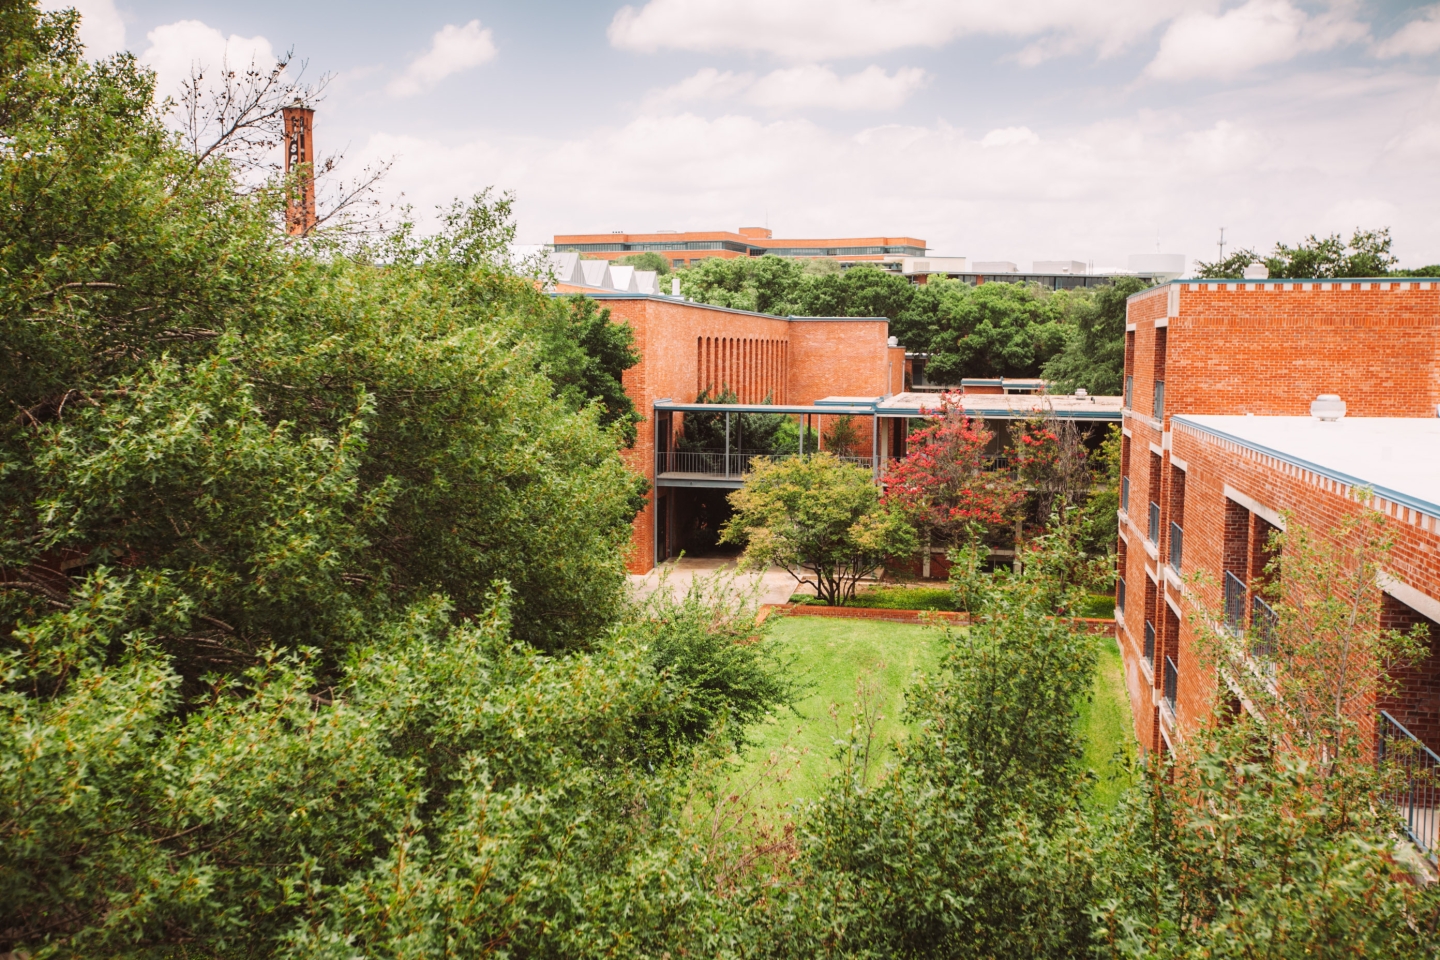 Ariel view of McLean Hall and courtyard